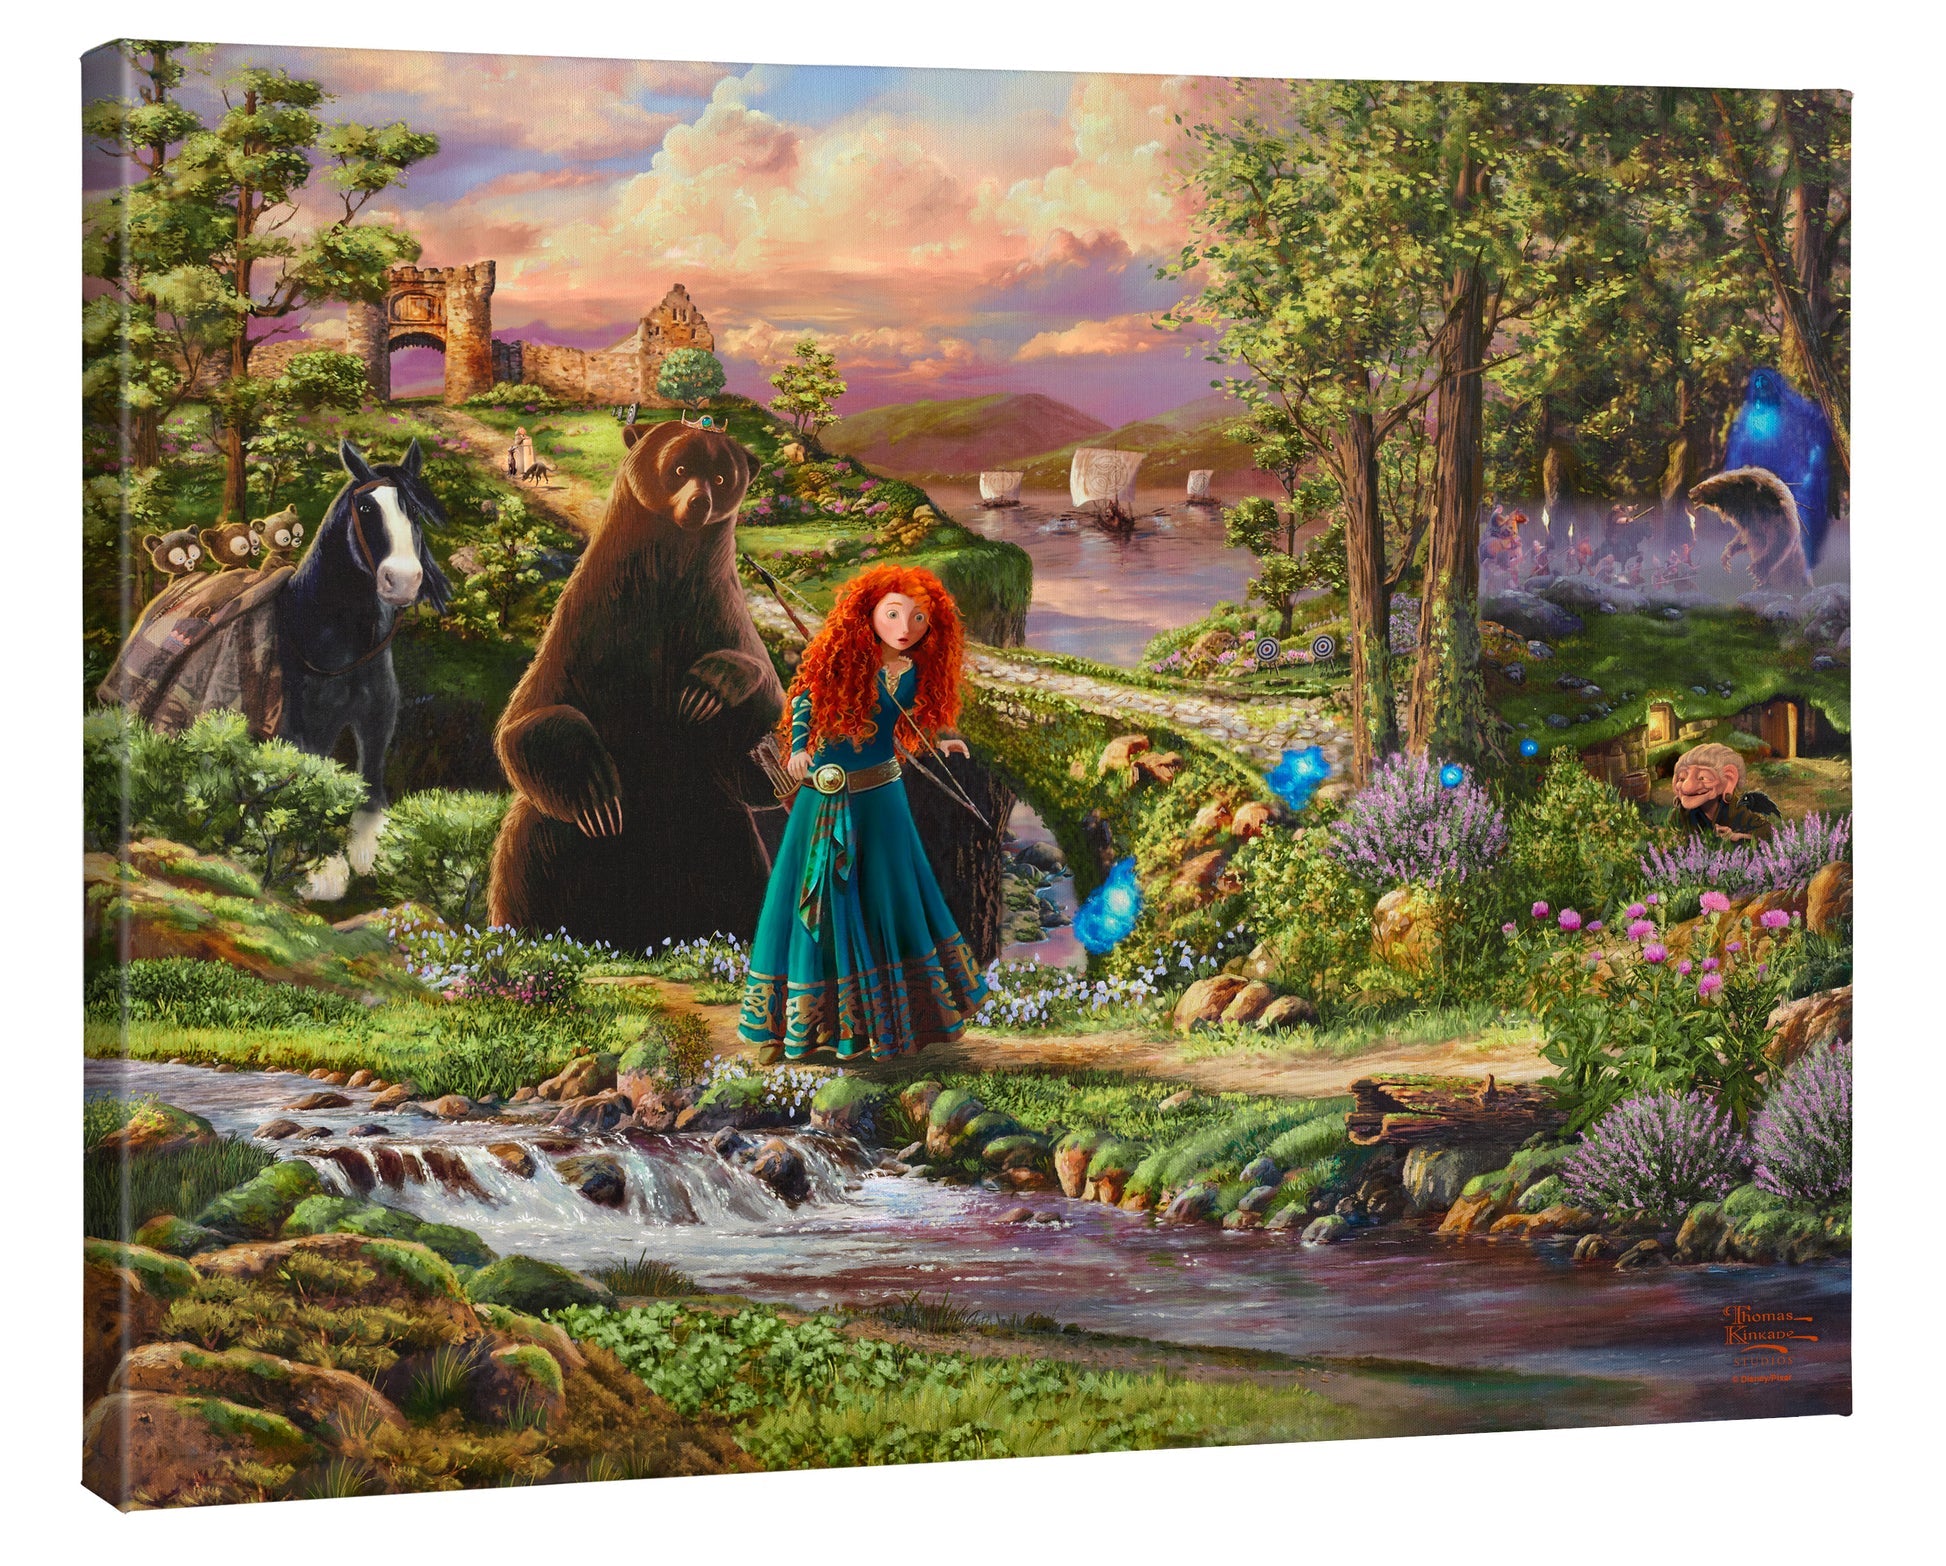 Merida is followed by her mother Queen Elinor who has been turned into a brown furry bear.